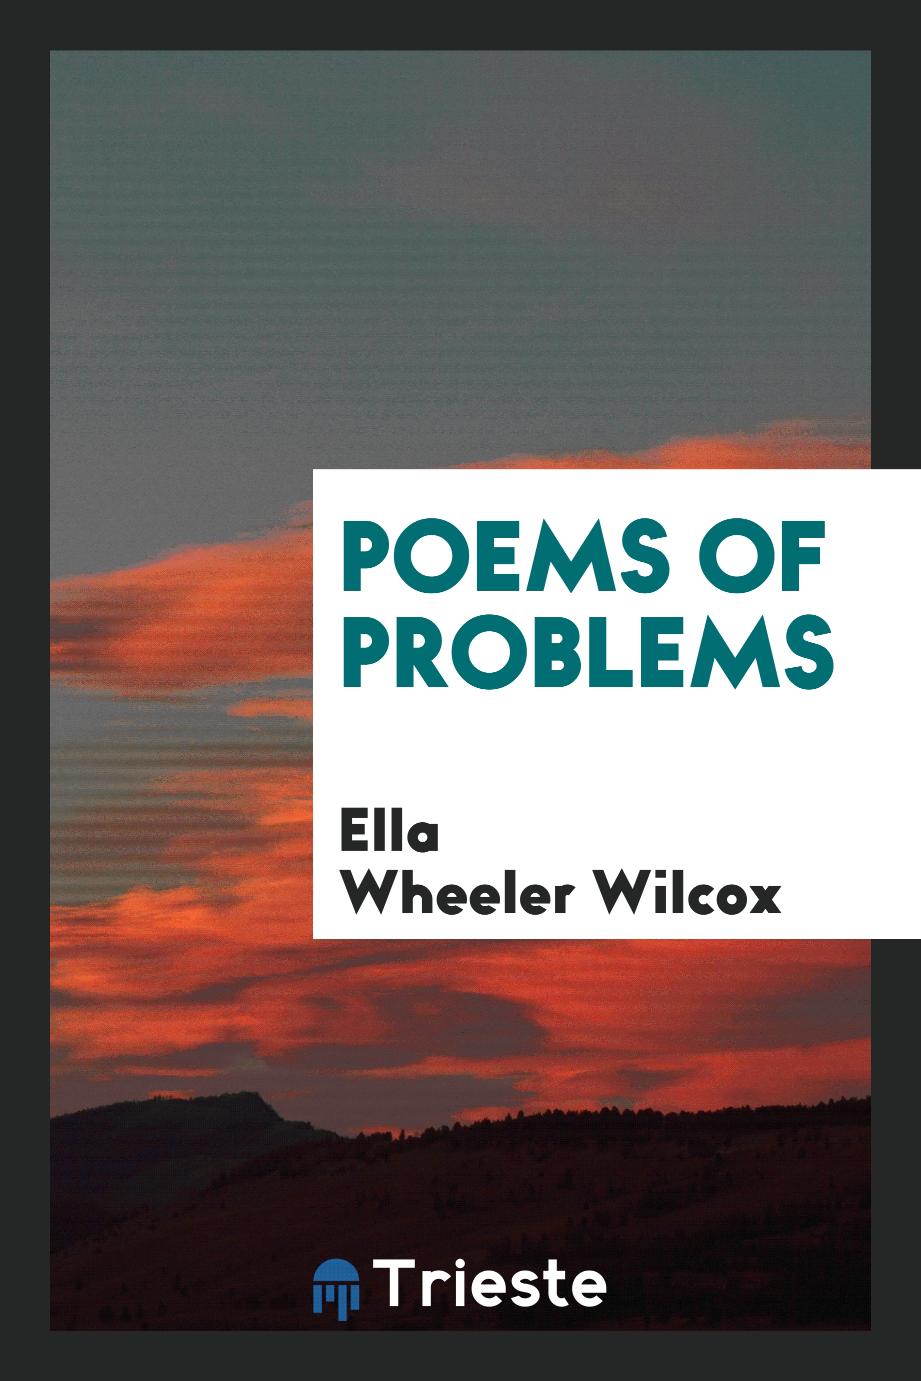 Poems of problems